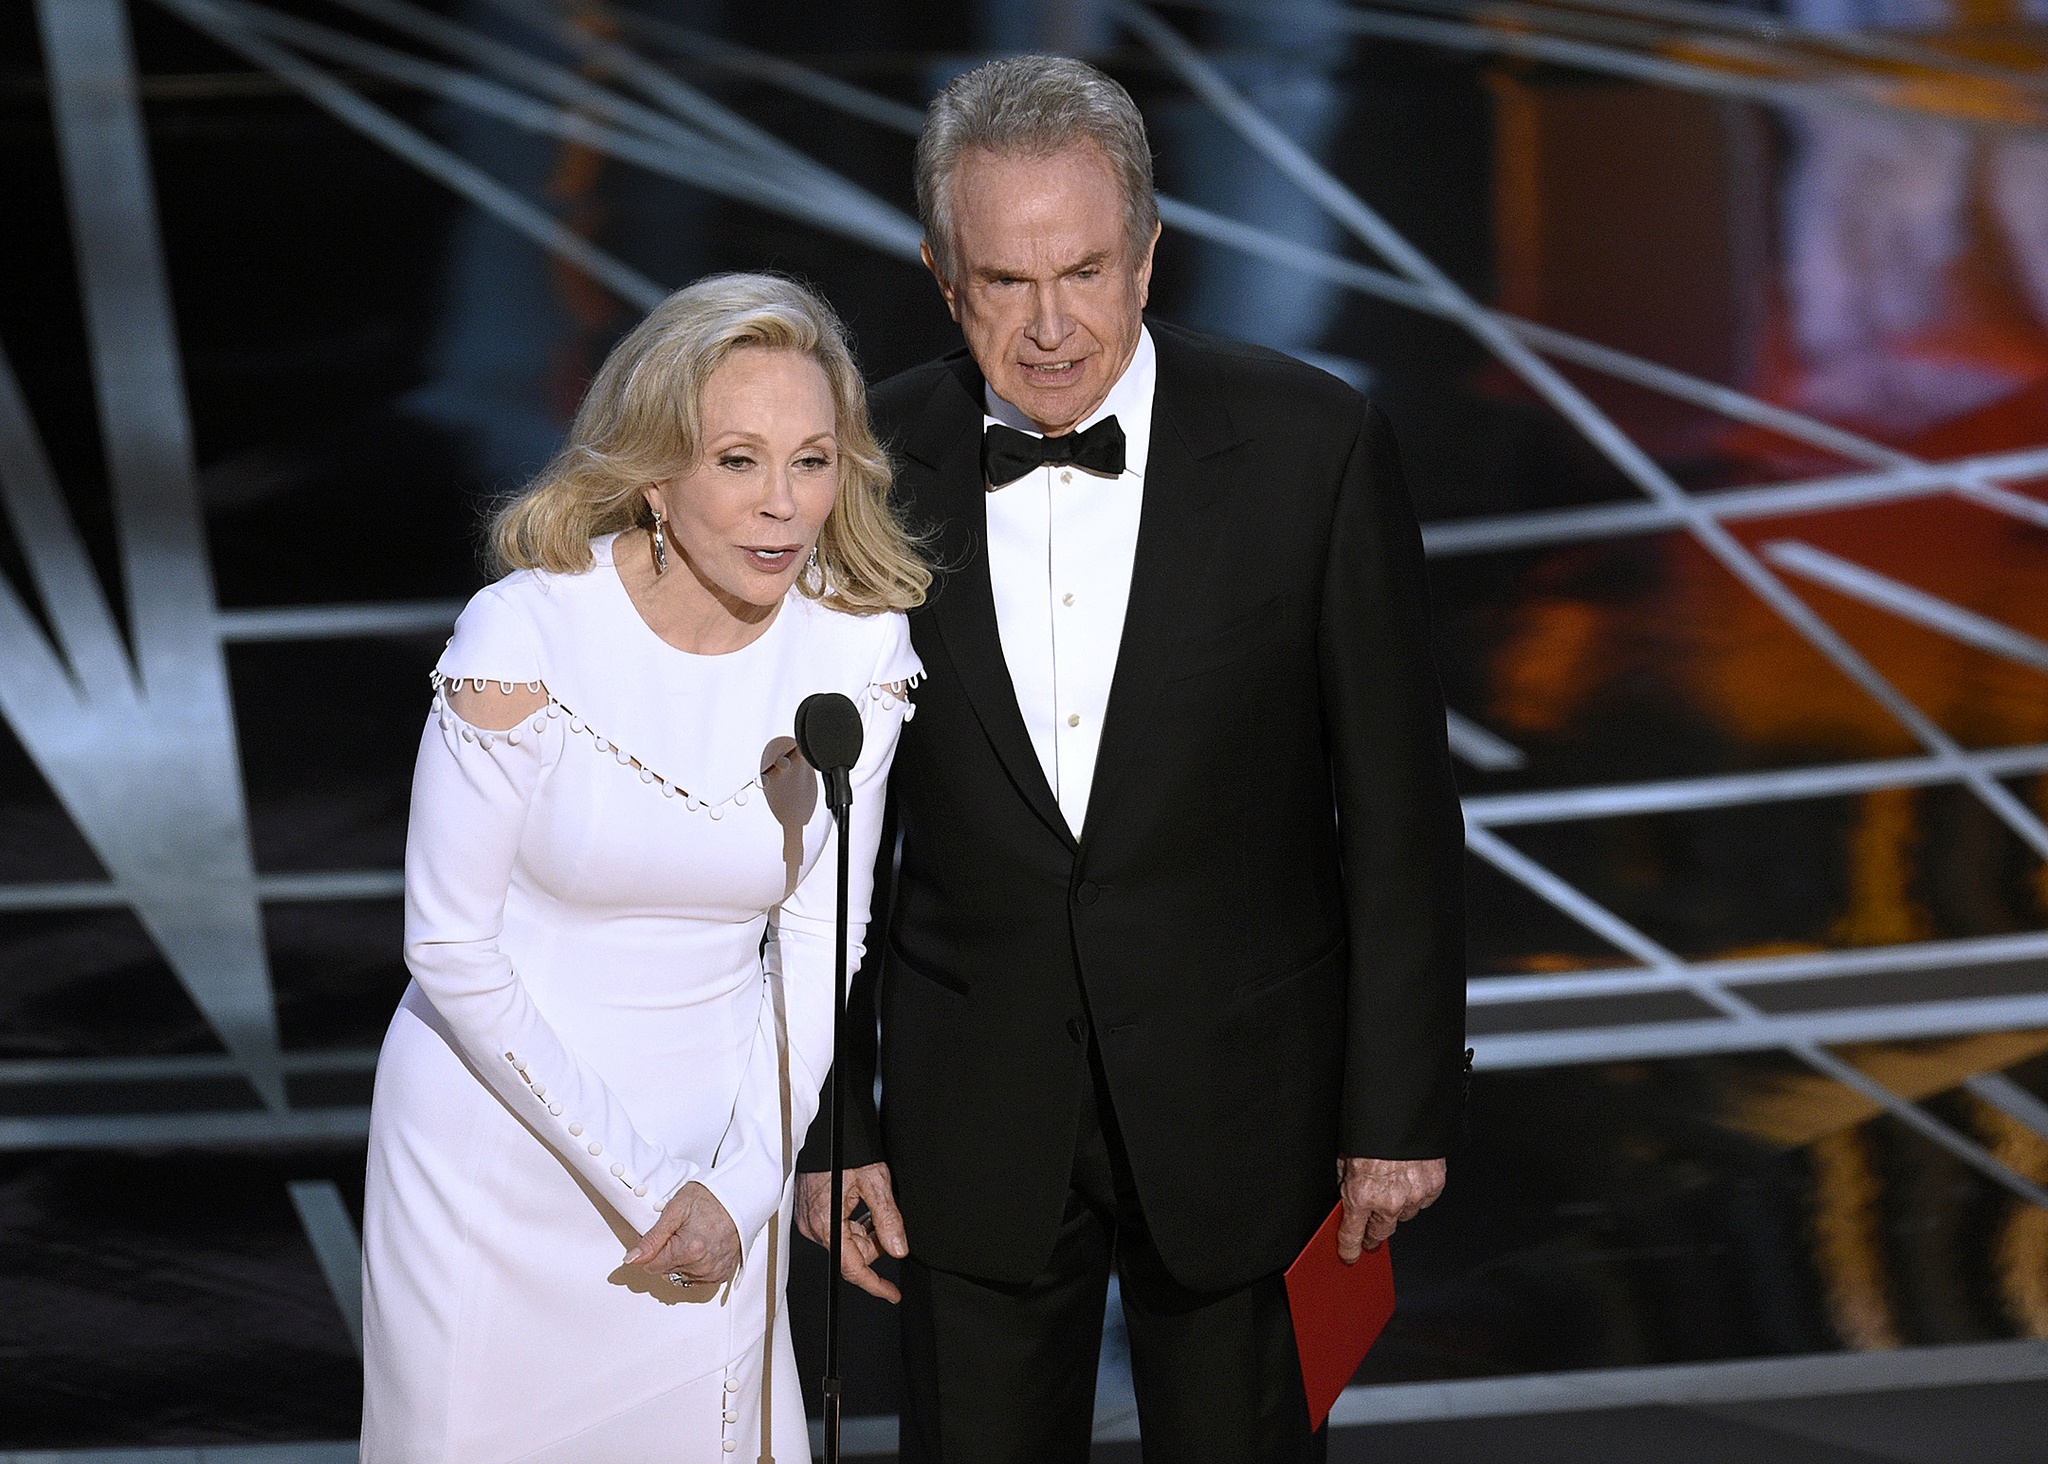 Chris Pizzello / Invision                                Faye Dunaway and Warren Beatty present the award for best picture at the Oscars on Sunday at the Dolby Theatre in Los Angeles. Dunaway read “La La Land” as the winner before host Jimmy Kimmel came forward to announce that “Moonlight” had indeed won, showing the inside of the envelope as proof.